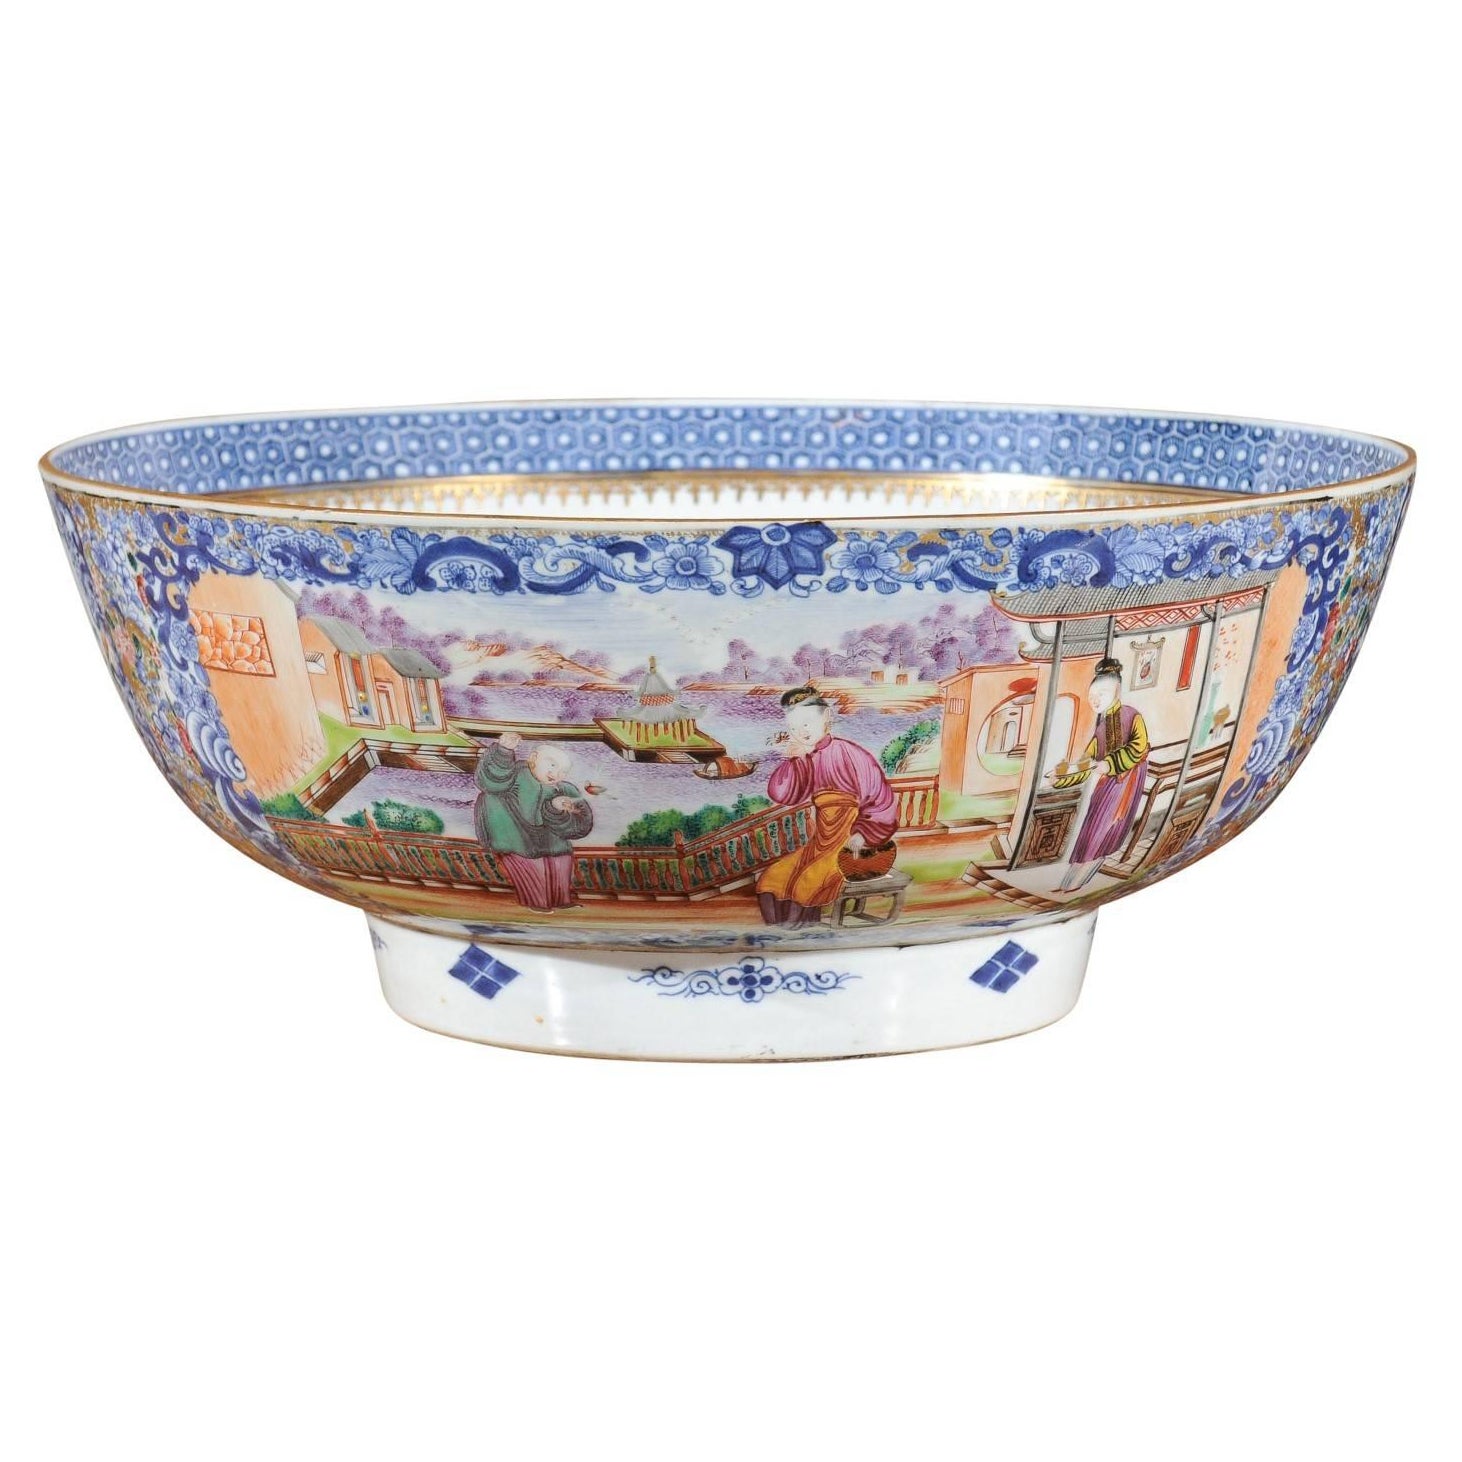 Large Chinese Export Punch Bowl in Mandarin Palette & Gilt Accents, ca. 1780 For Sale